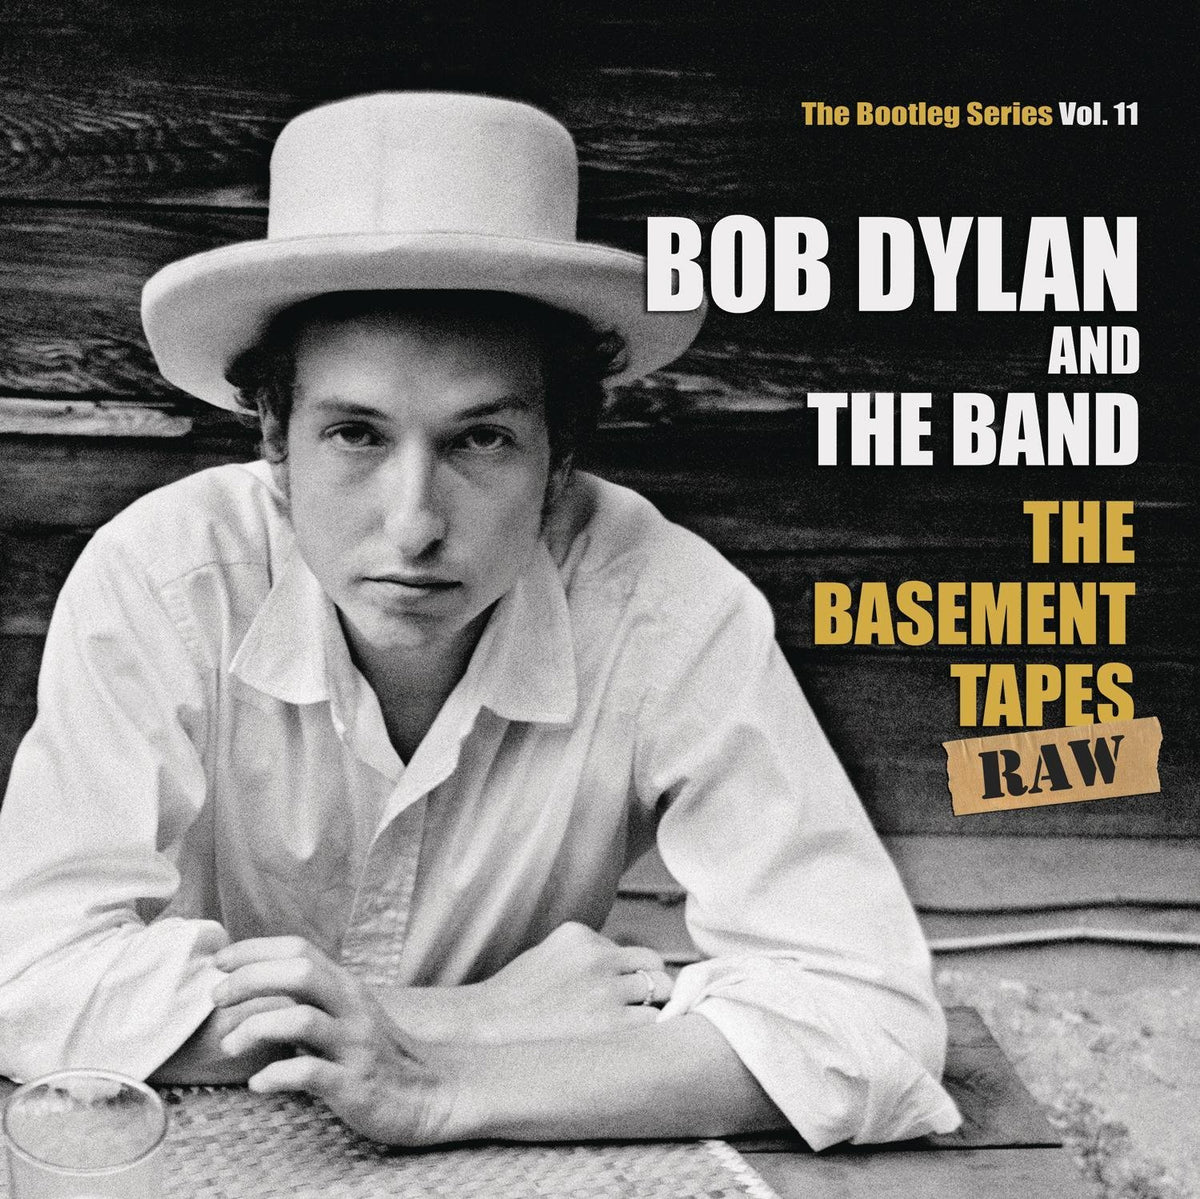 Bob Dylan And The Band - The Basement Tapes Raw